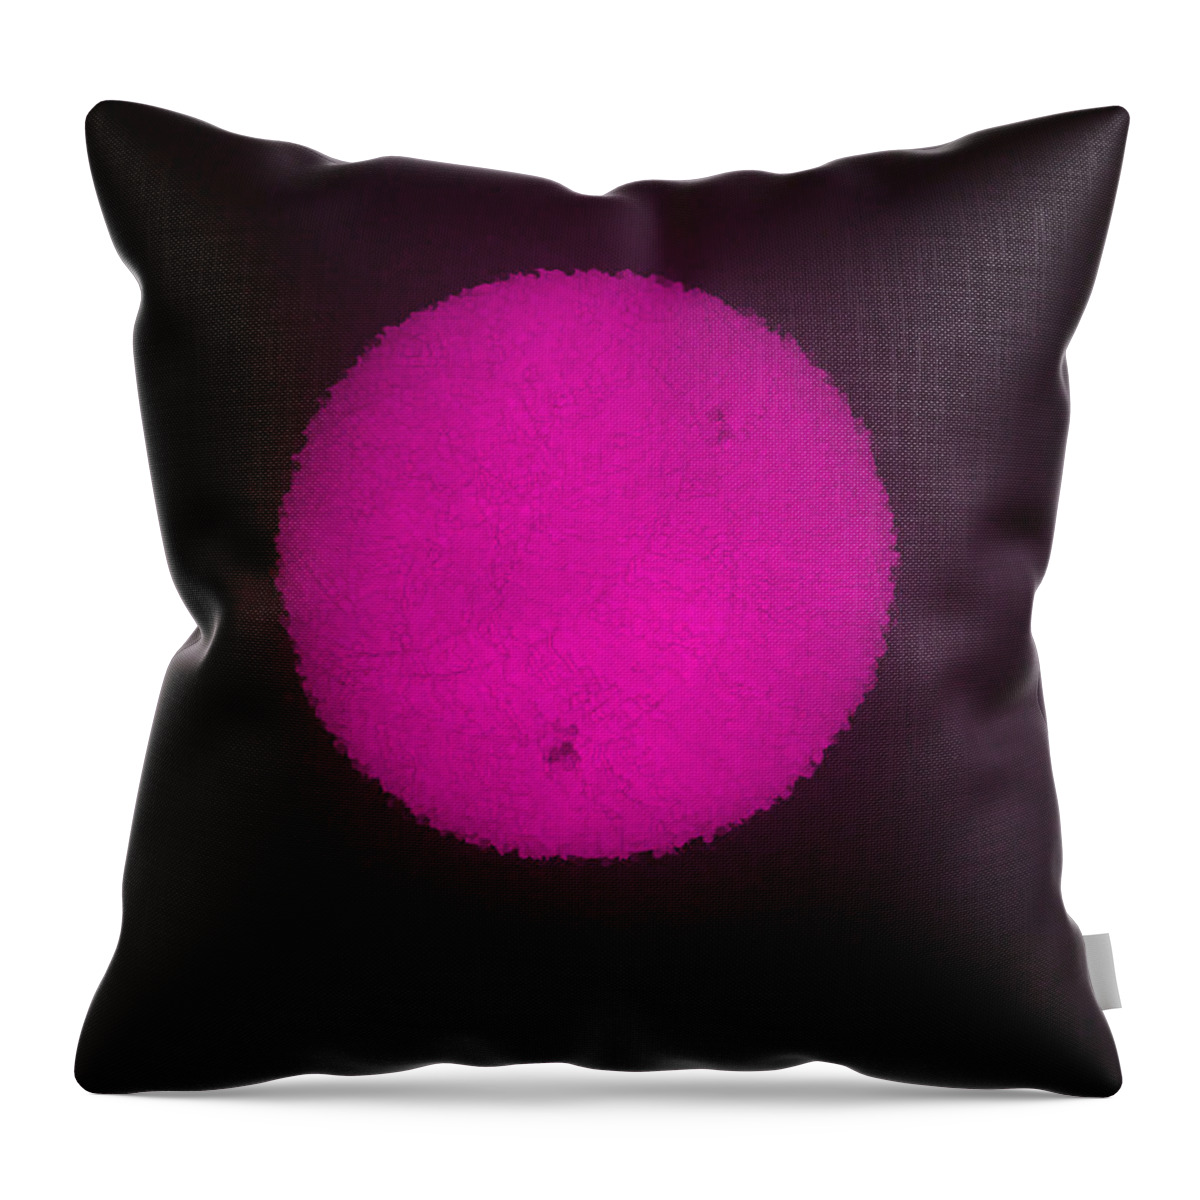 Pink Throw Pillow featuring the painting Beautiful Pink Moon by Bruce Nutting